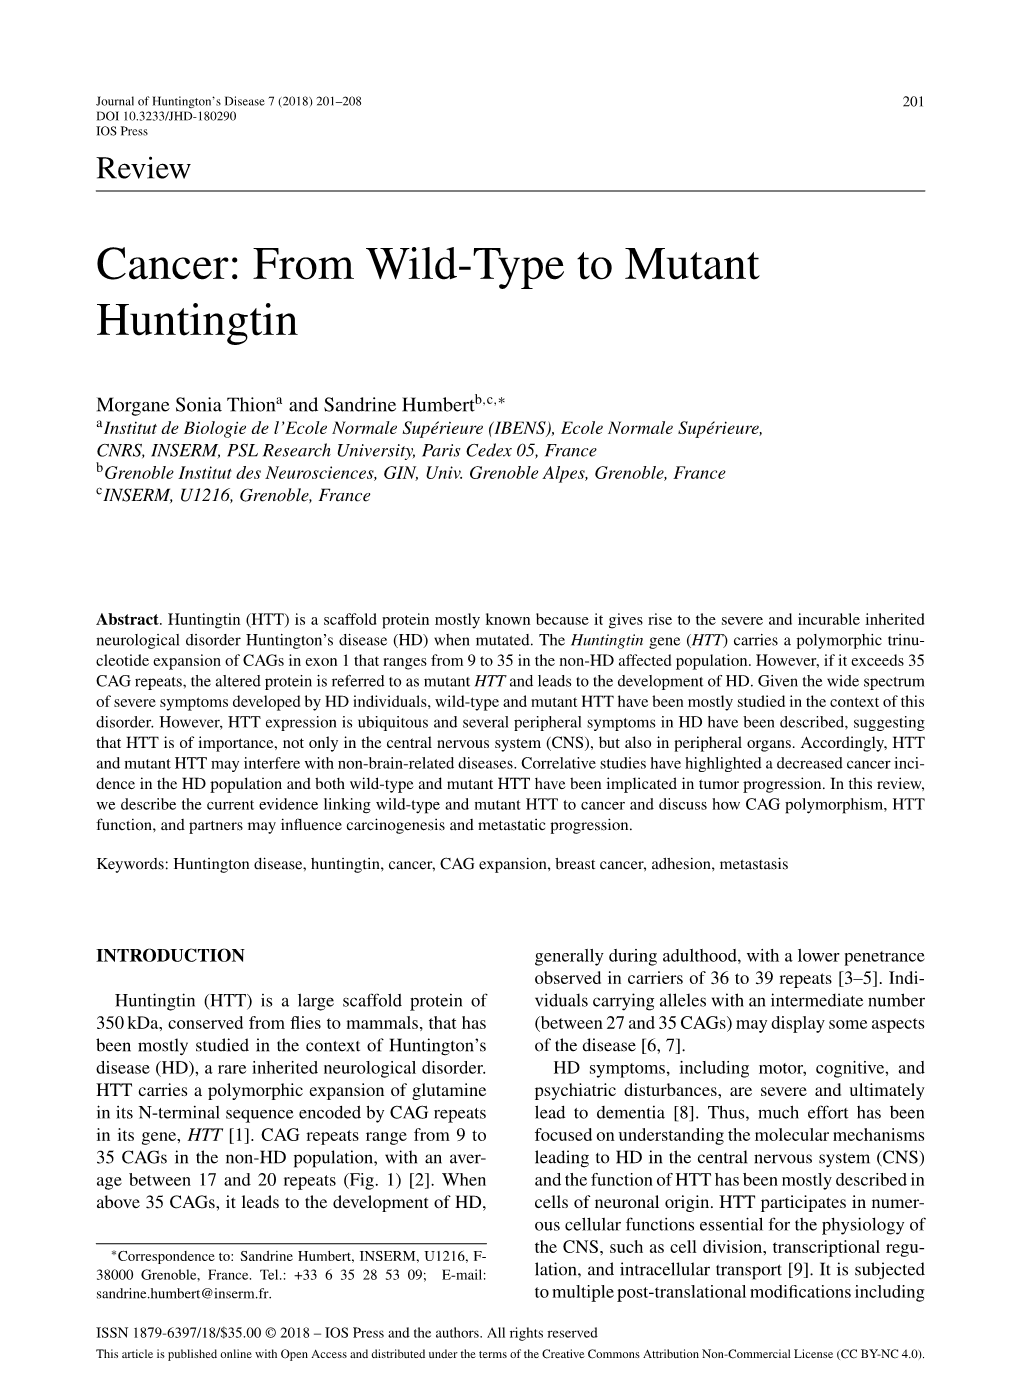 Cancer: from Wild-Type to Mutant Huntingtin